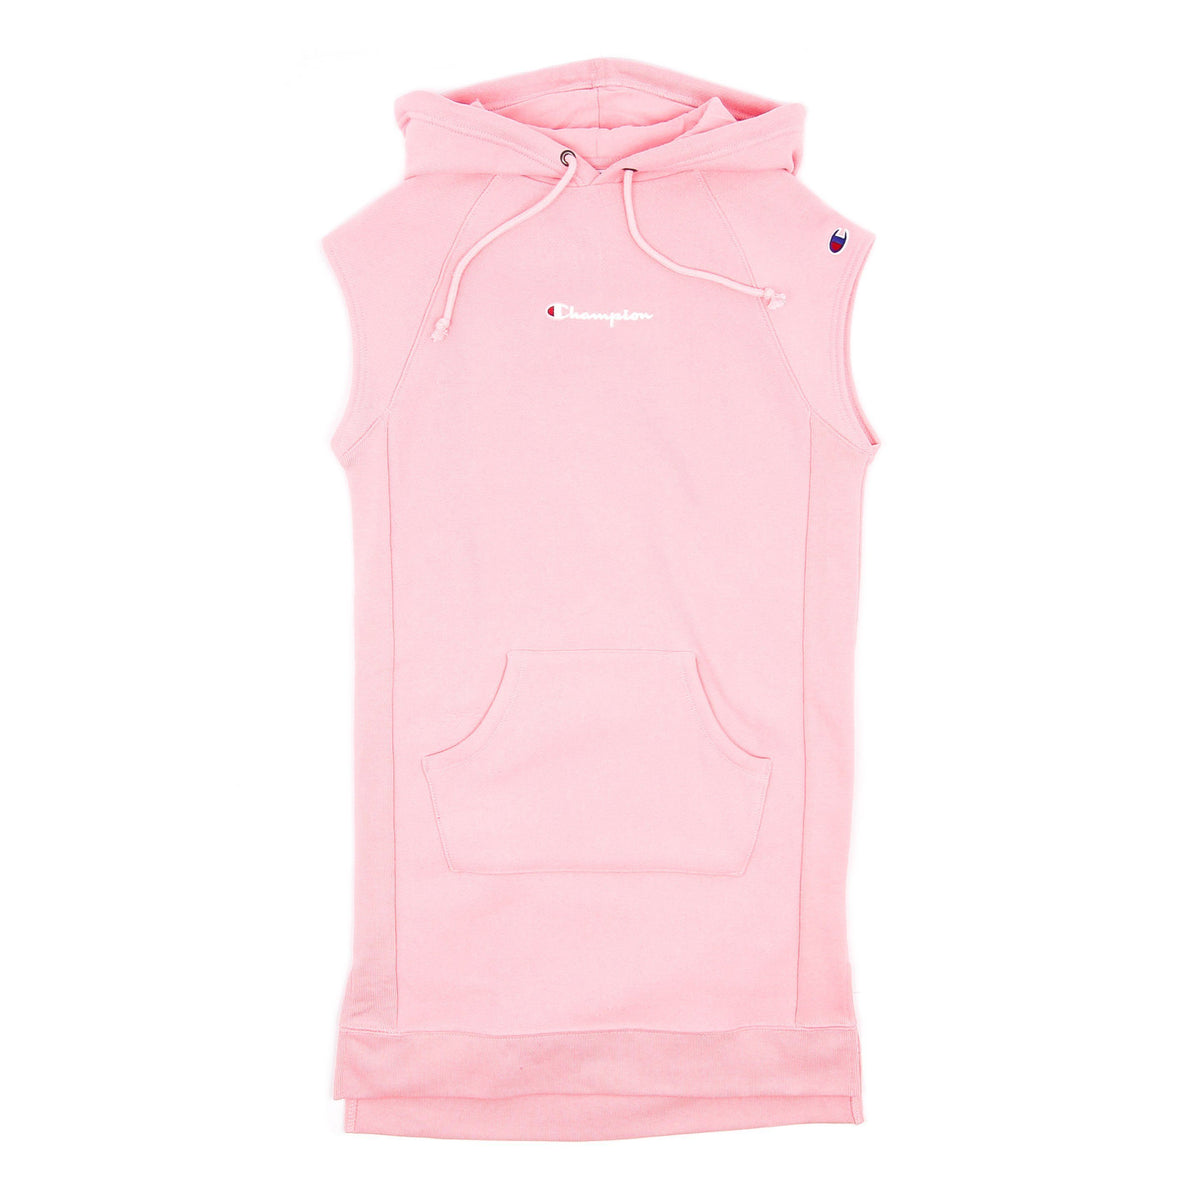 SKIRTS - Champion Women's Reverse Weave Dress W/hood Embroidered Pink Bow WL779-579727-7CY